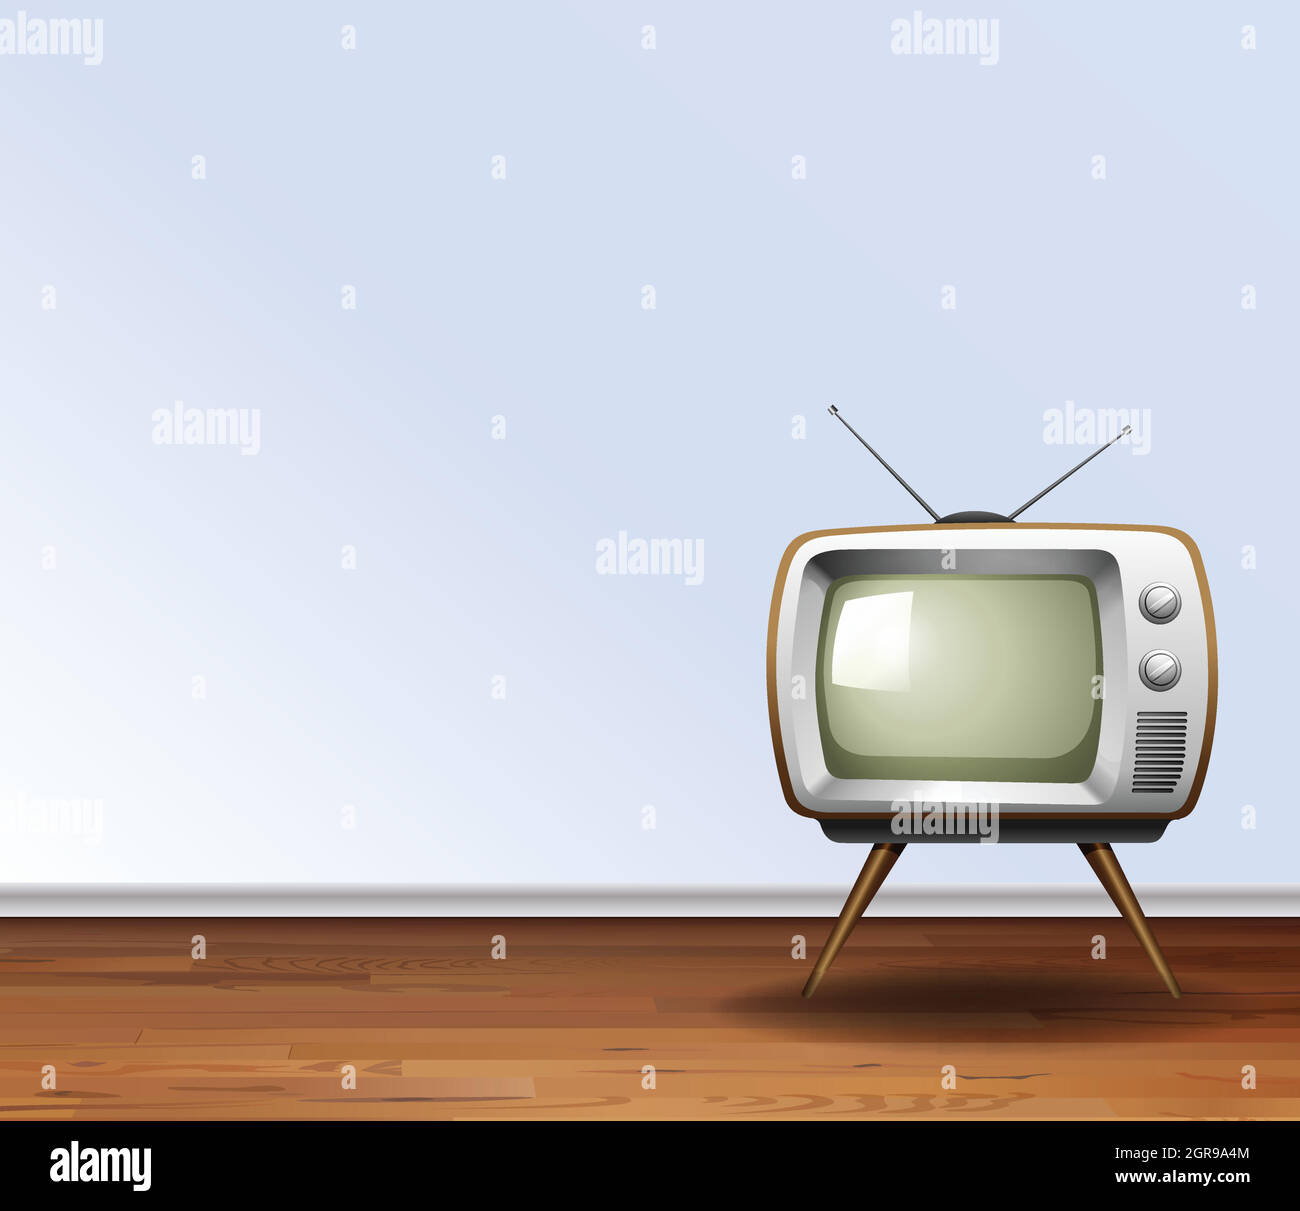 Old tv in room Stock Vector Images - Alamy